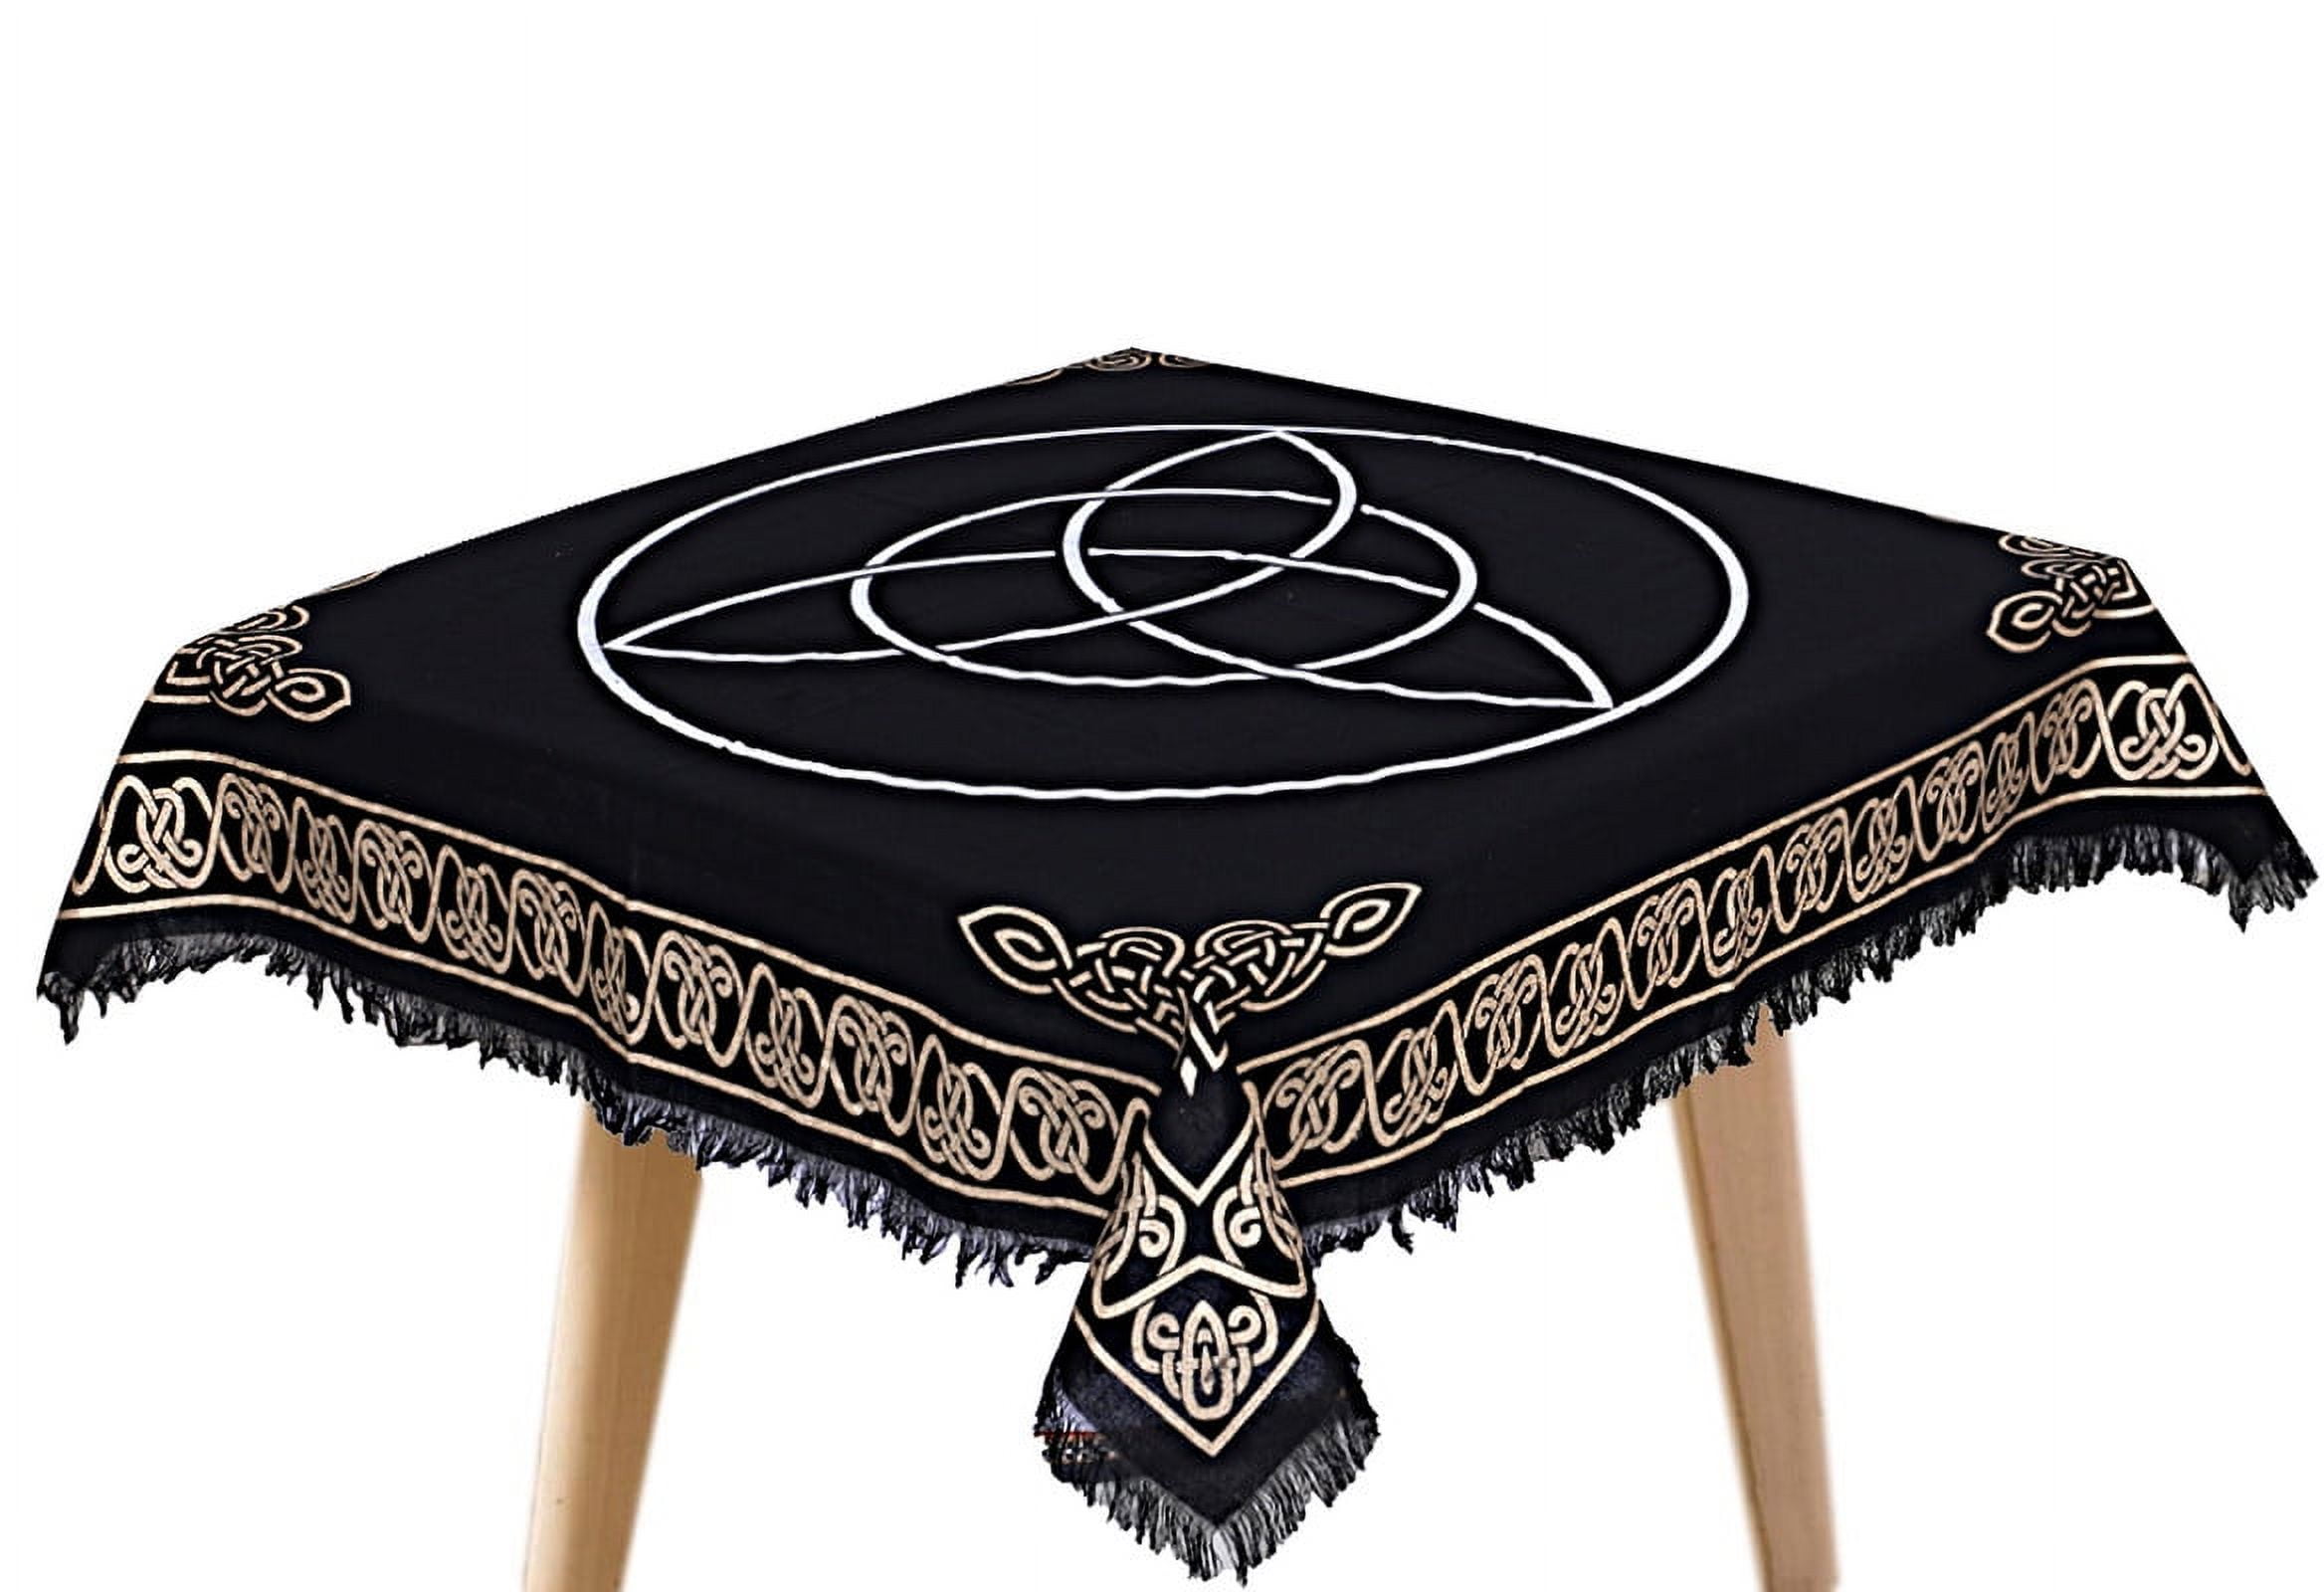 Altar Cloth Alter Tarot Witchery Supplies Celtic Tarot Cards Table Napkins  Witchcraft Black Gold Tablecloth Spiritual Celestial Deck Cloth with